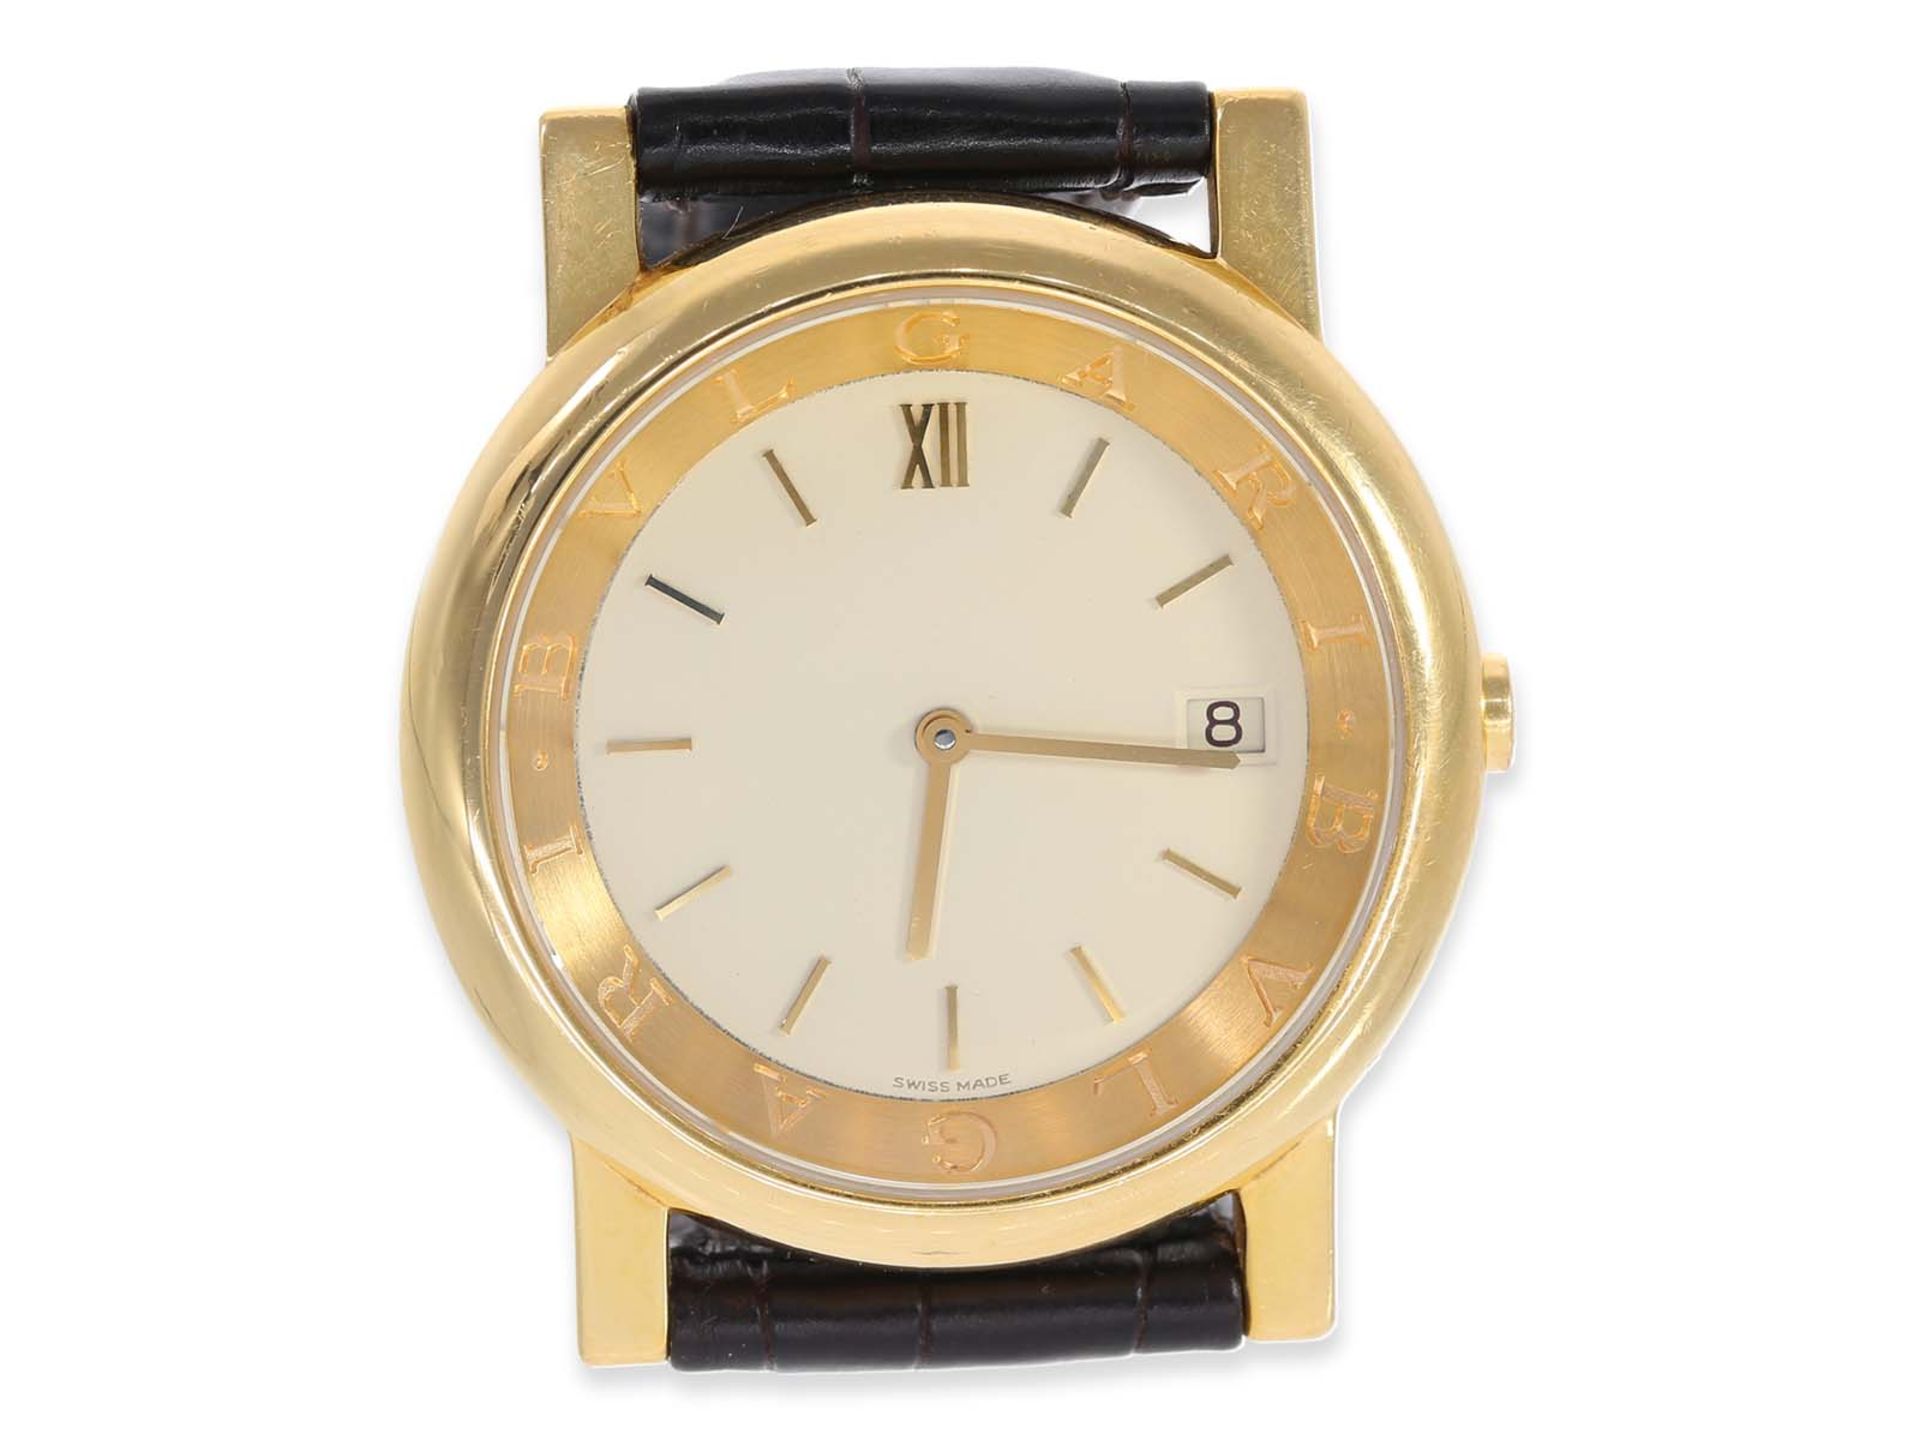 Wrist watch: luxury Bvlgari Anifiteatro 18K gold, reference AT 35GL - Image 2 of 4